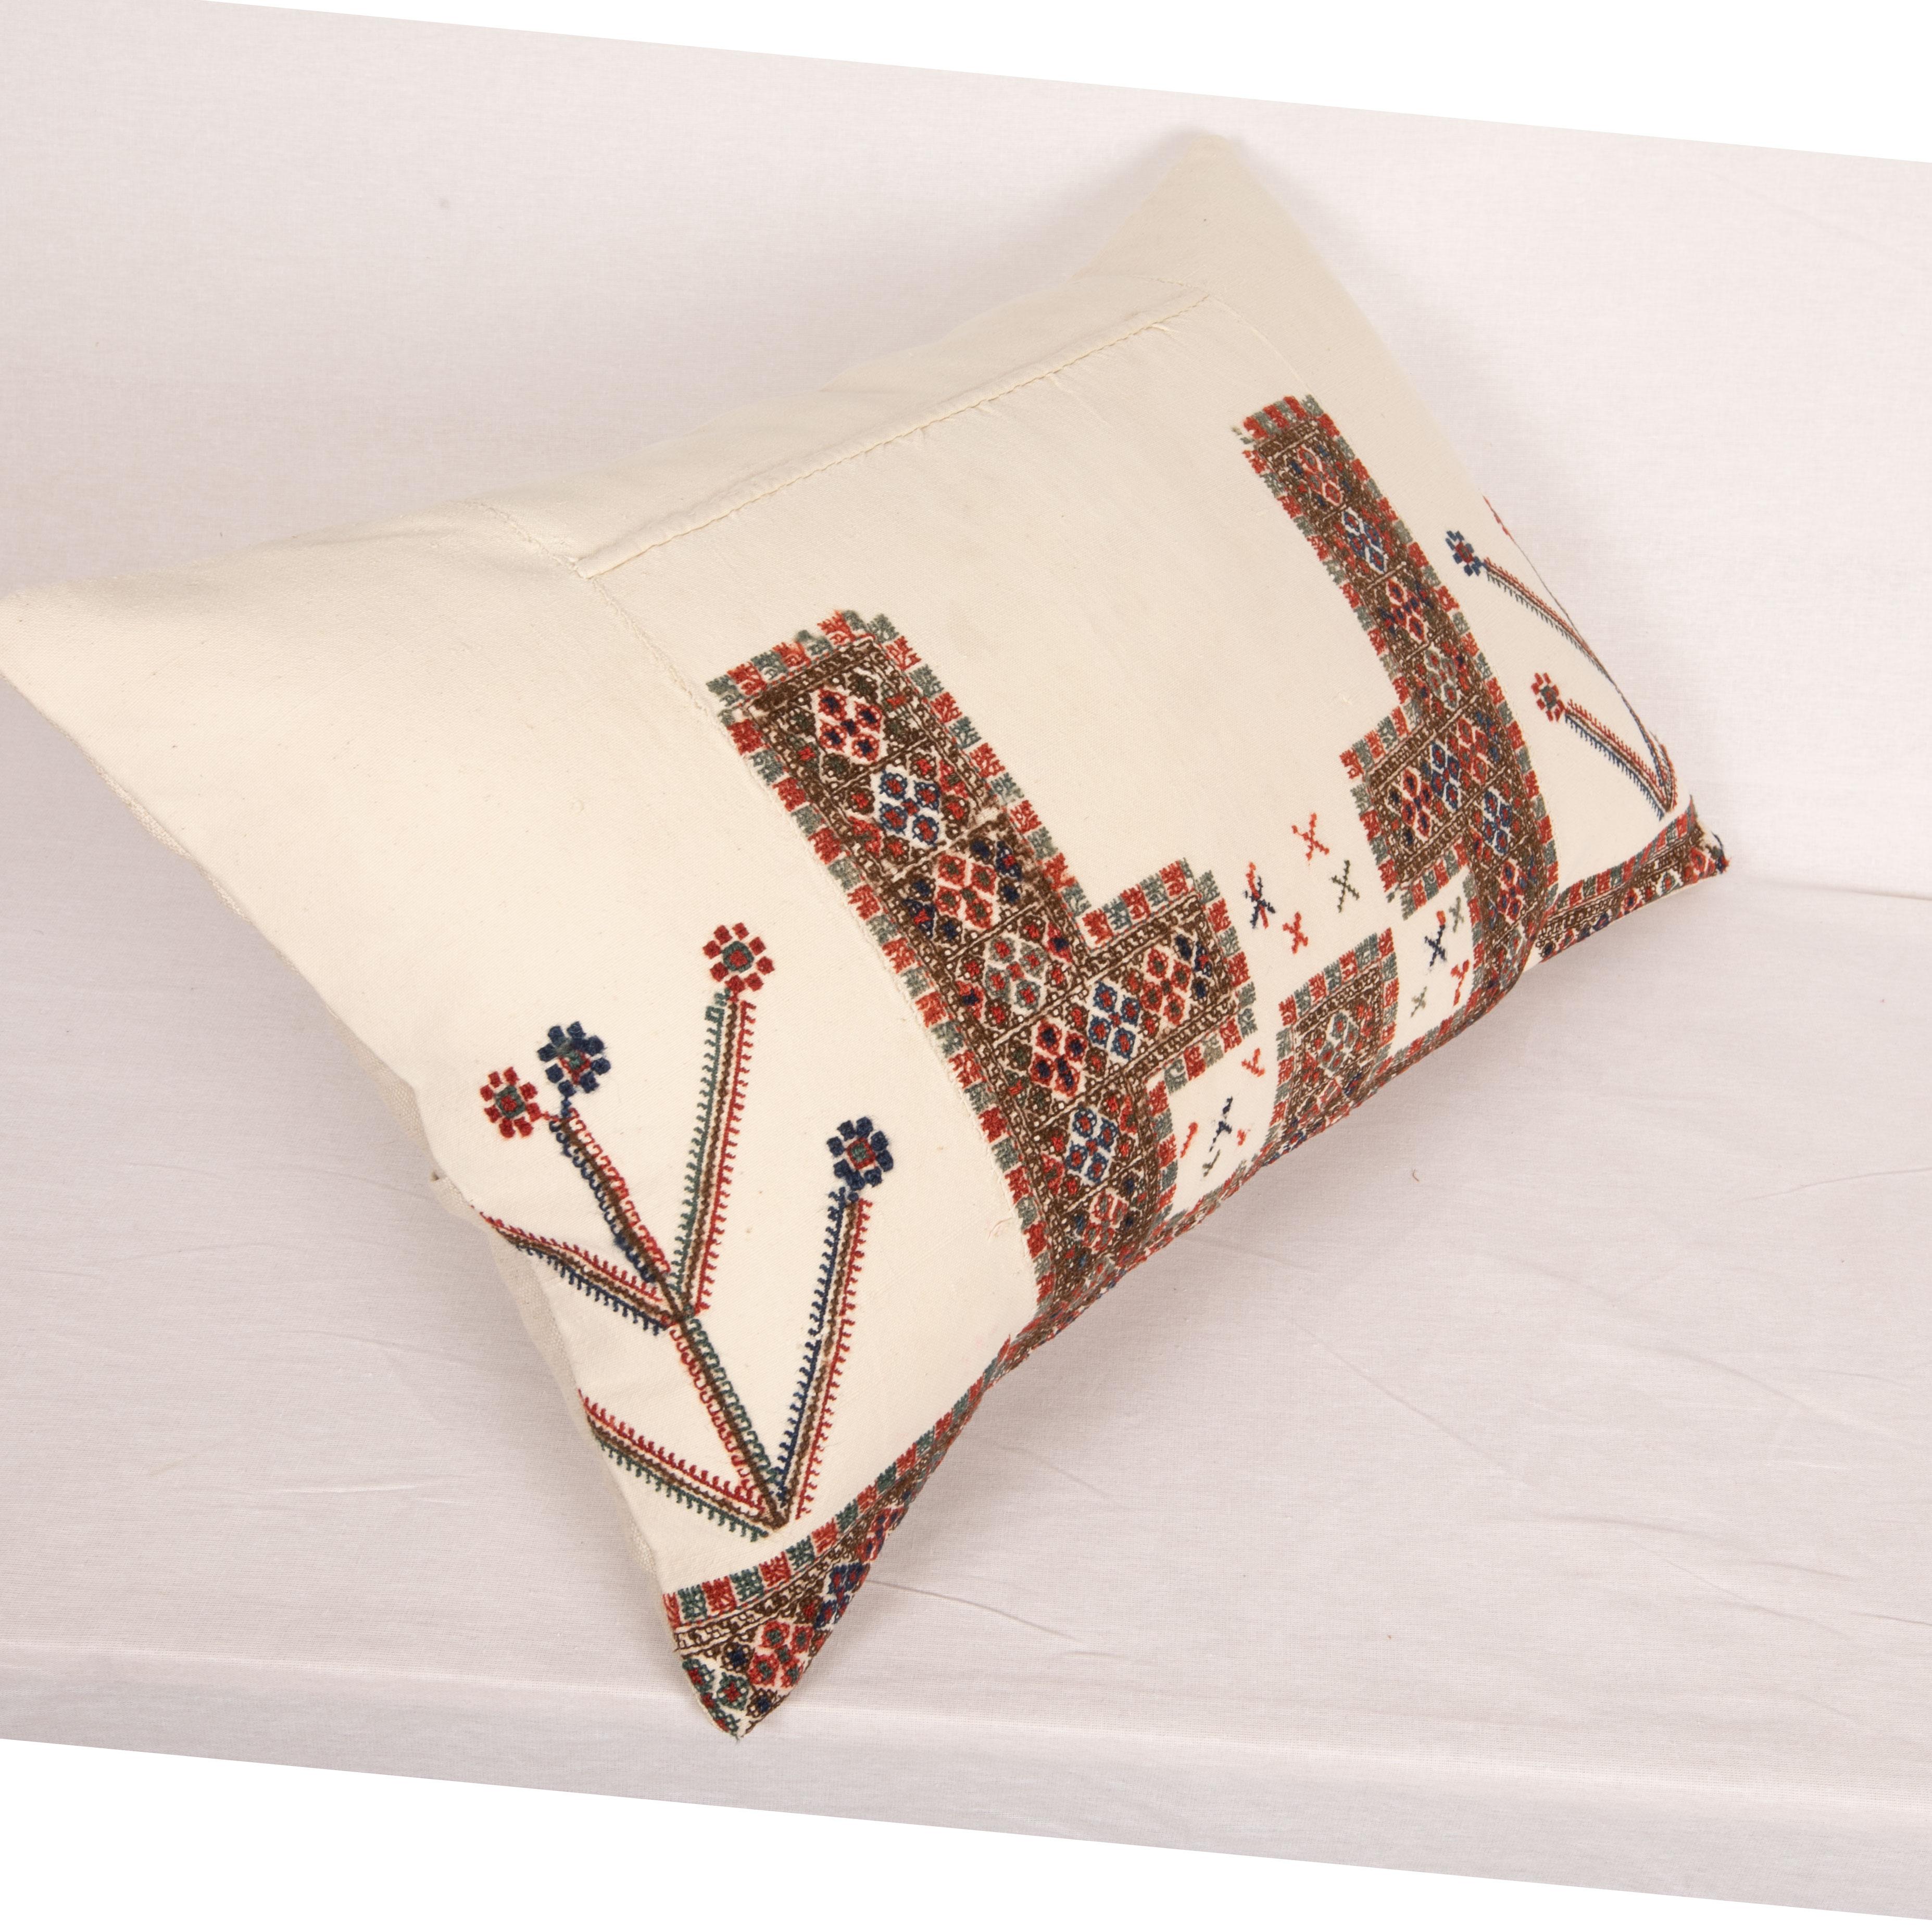 Antique Pillow Cover Made from an Eastern European Dress Front, Early 20th C 1